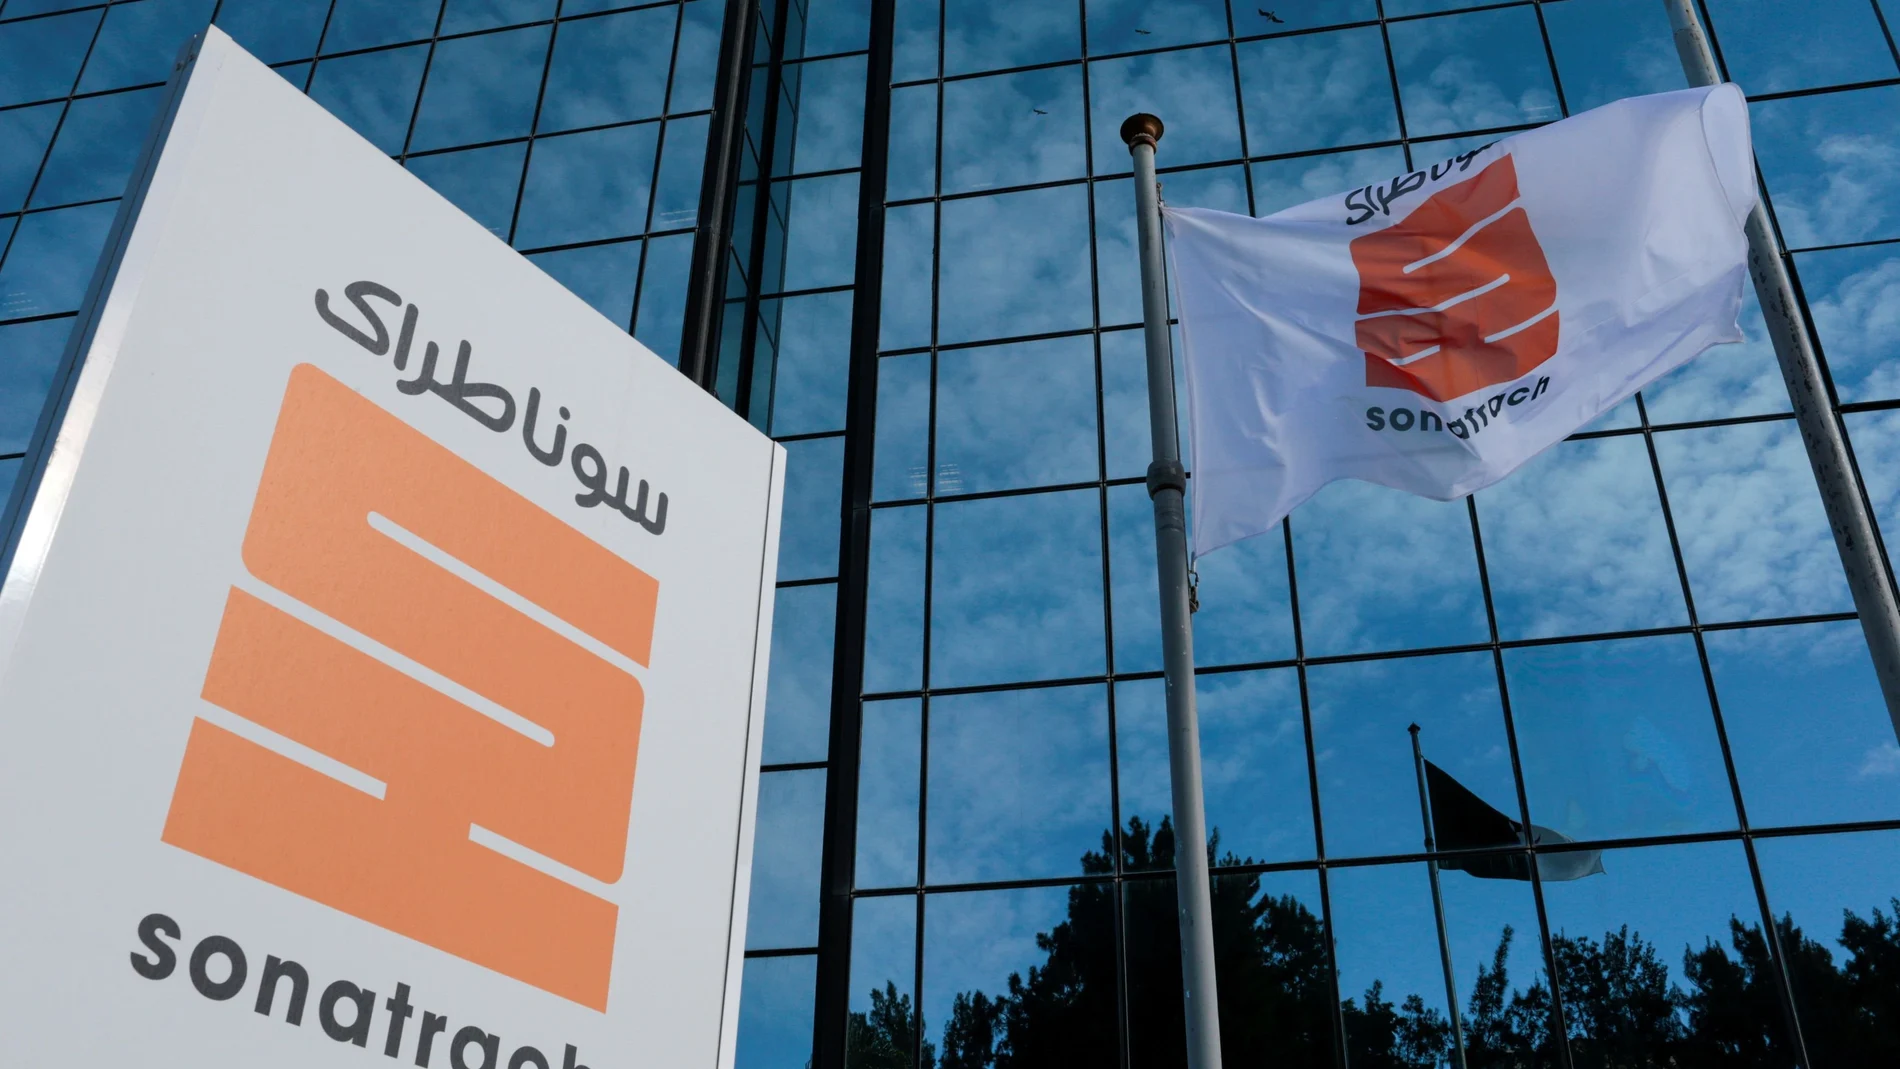 FILE PHOTO: The logo of the state energy company Sonatrach is pictured at the headquarters in Algiers, Algeria November 25, 2019. REUTERS/Ramzi Boudina/File Photo